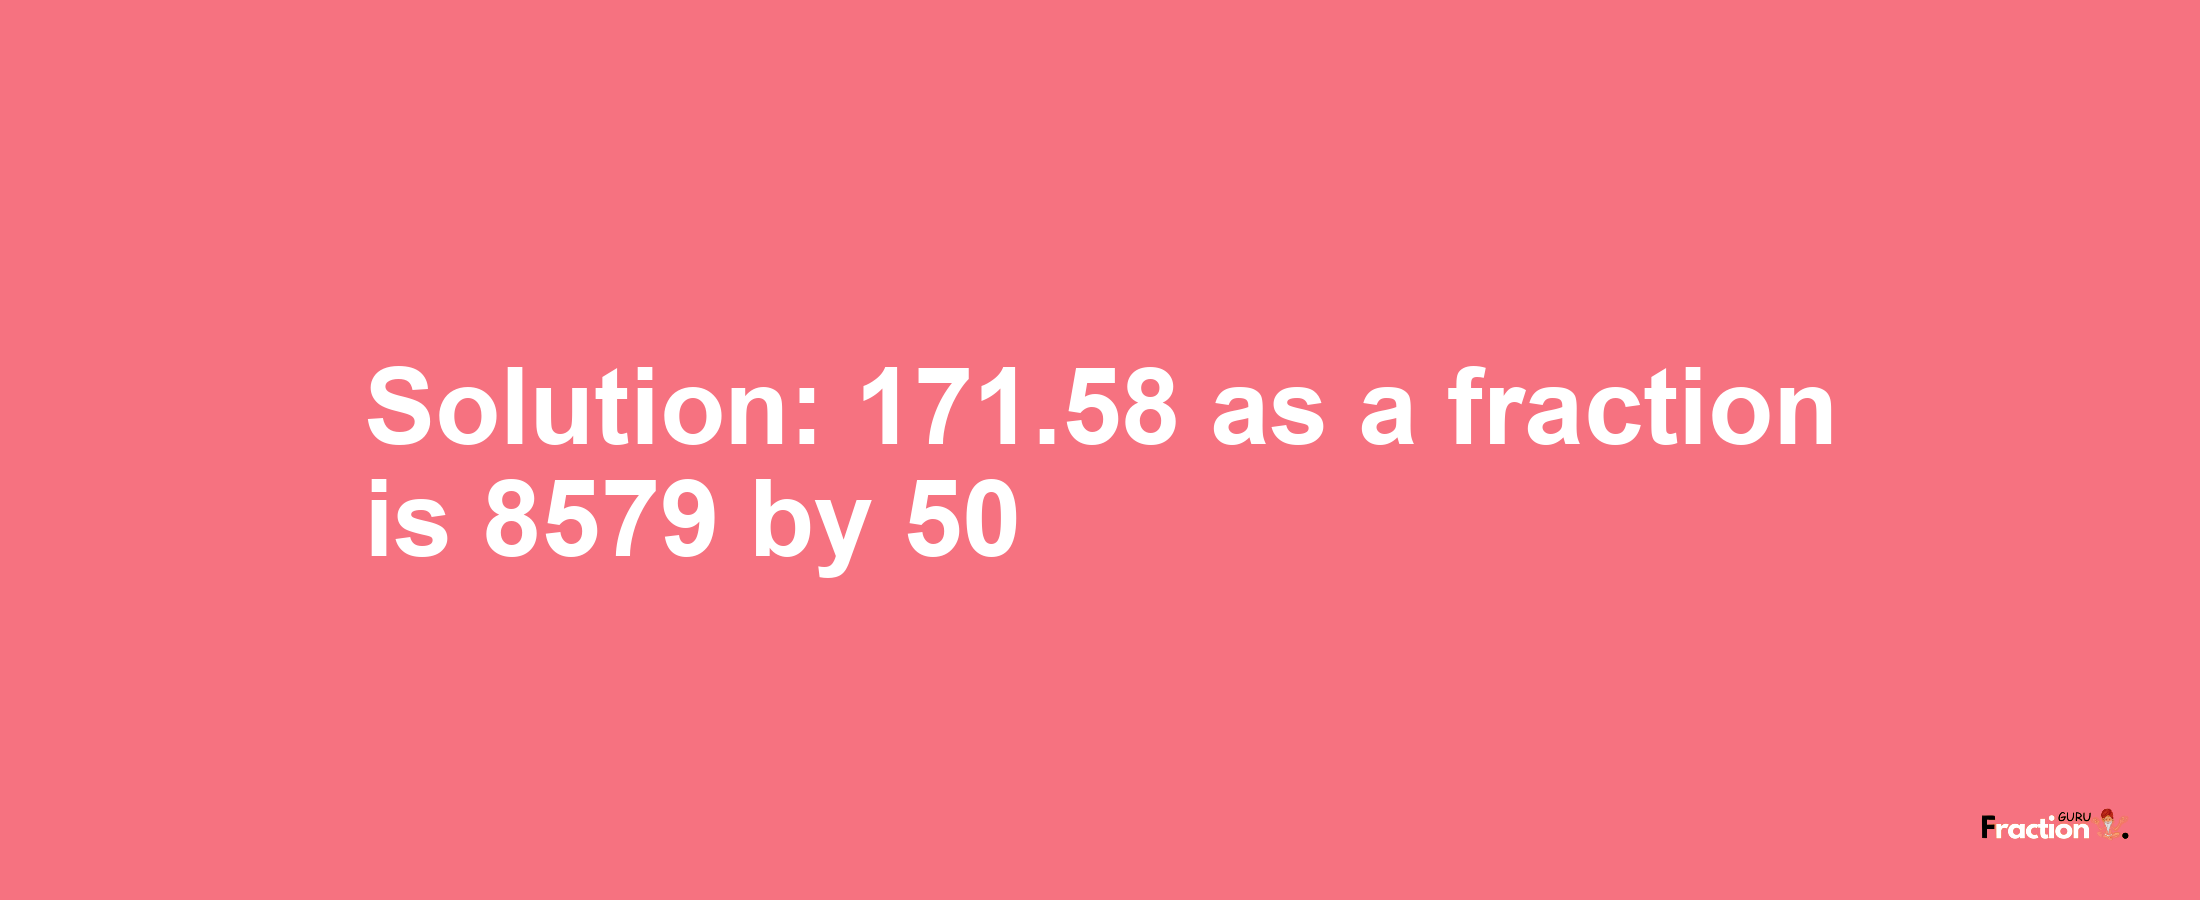 Solution:171.58 as a fraction is 8579/50